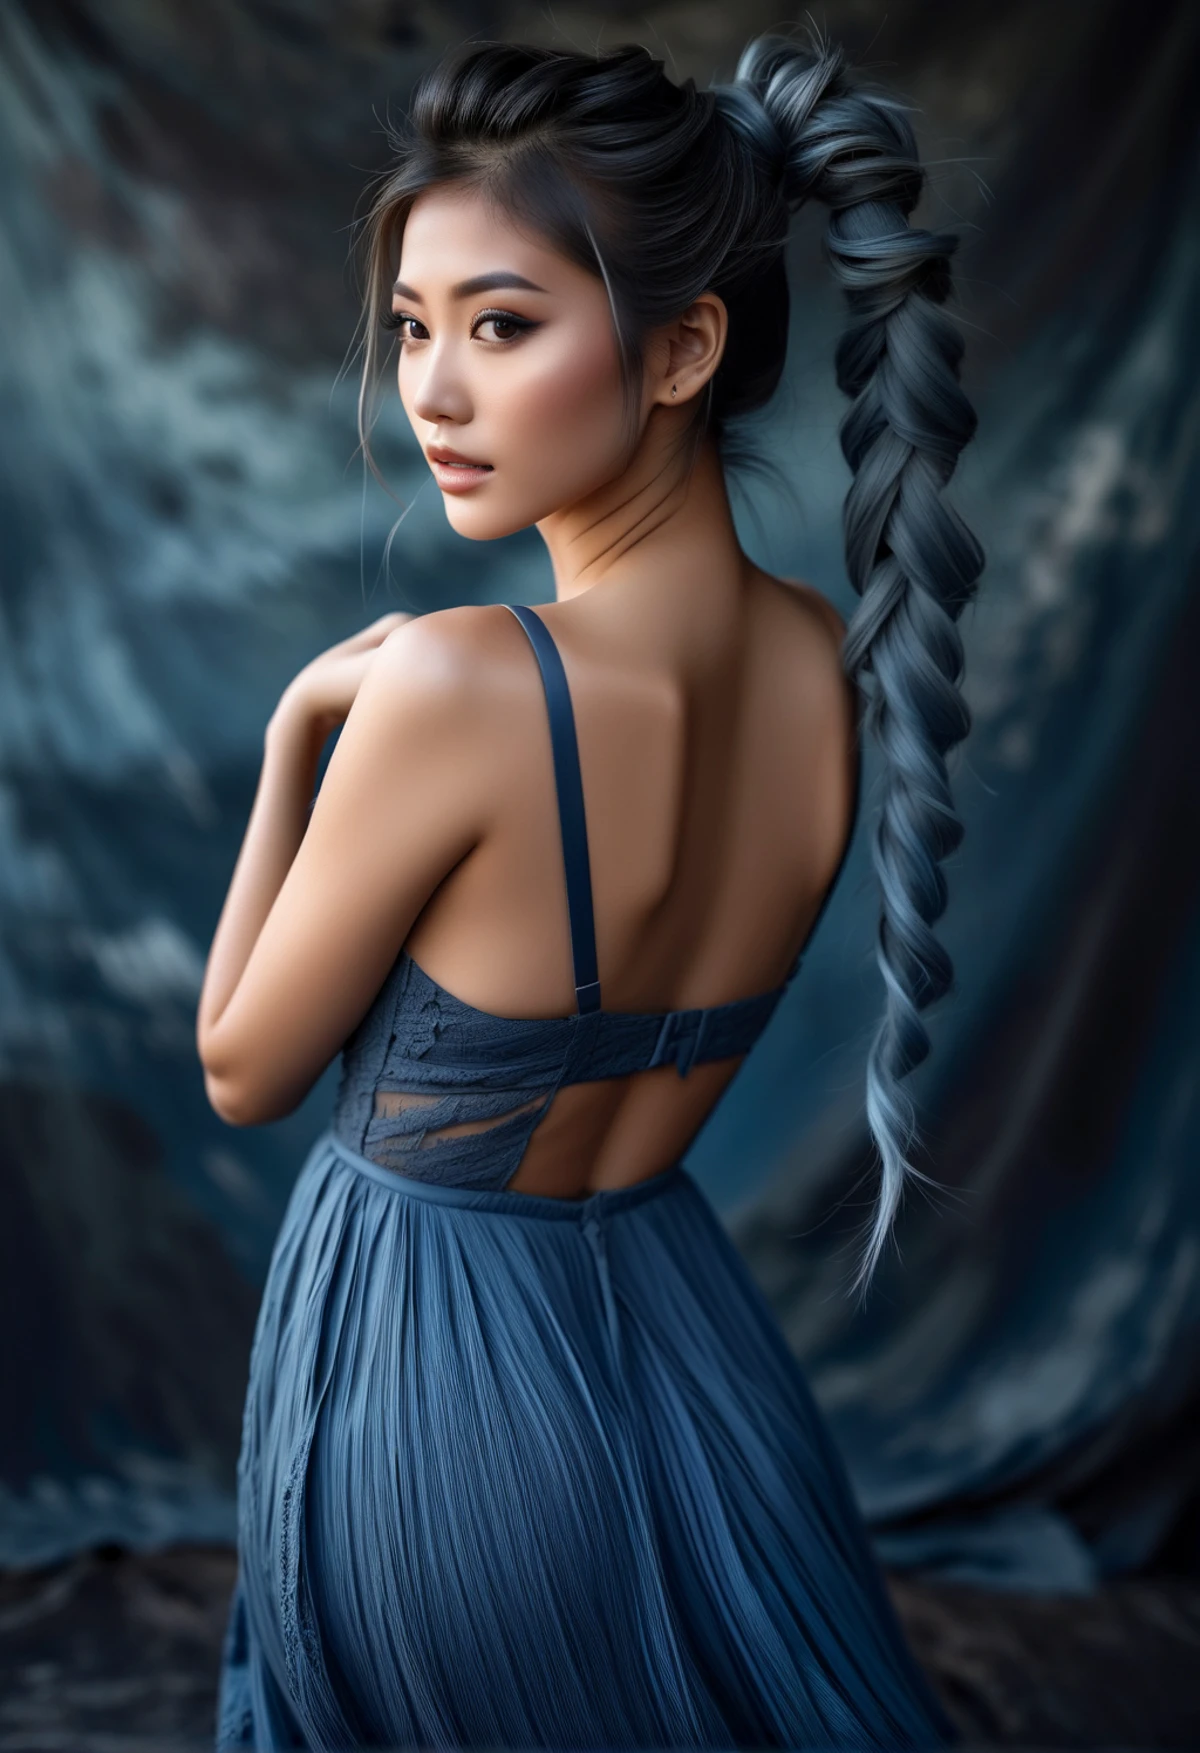 Masterpiece, highly detailed, elegant, intricate, cinematic photo of (1girl), (25 years old), (Japanese girl), (wearing Sundress with thin straps), (Braided Ponytail cut hairstyle:1), (Charcoal Gray with Steel Blue Balayage color hair:1), (real hair movement), (photoshoot pose:1)